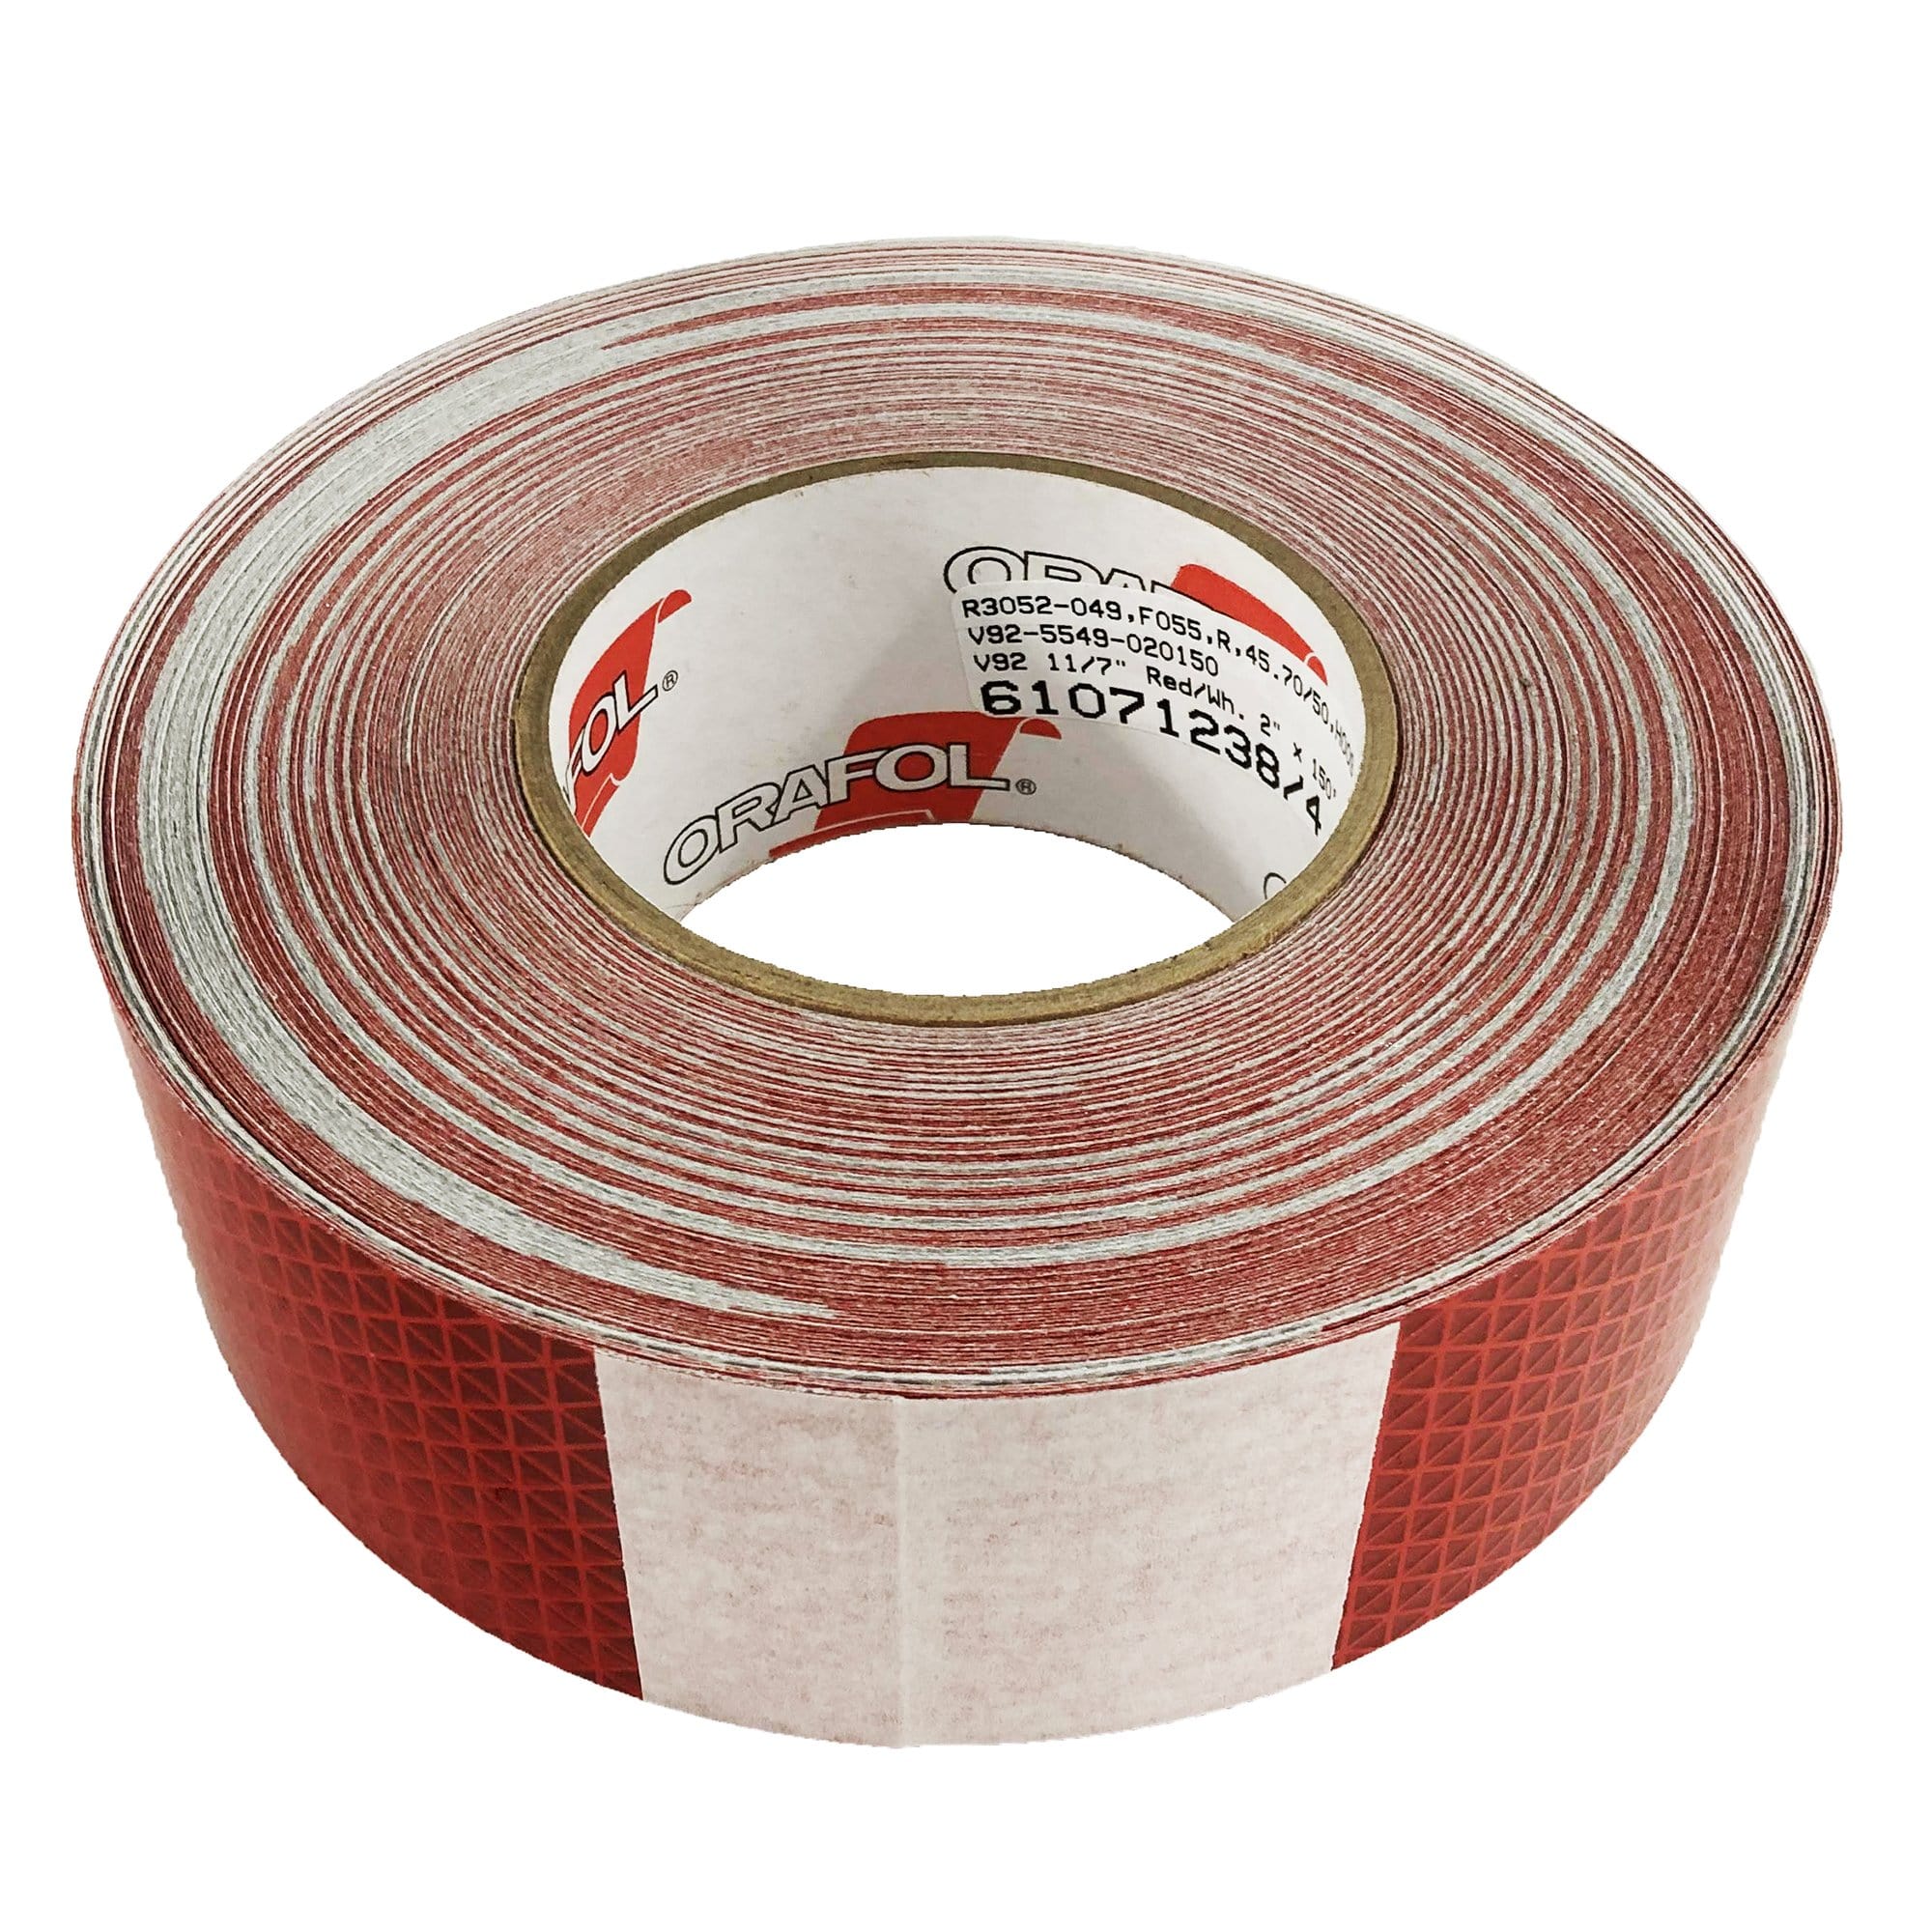 Anderson Marine / Peterson MFG 465-1 Manufacturing Reflective Marking Tape